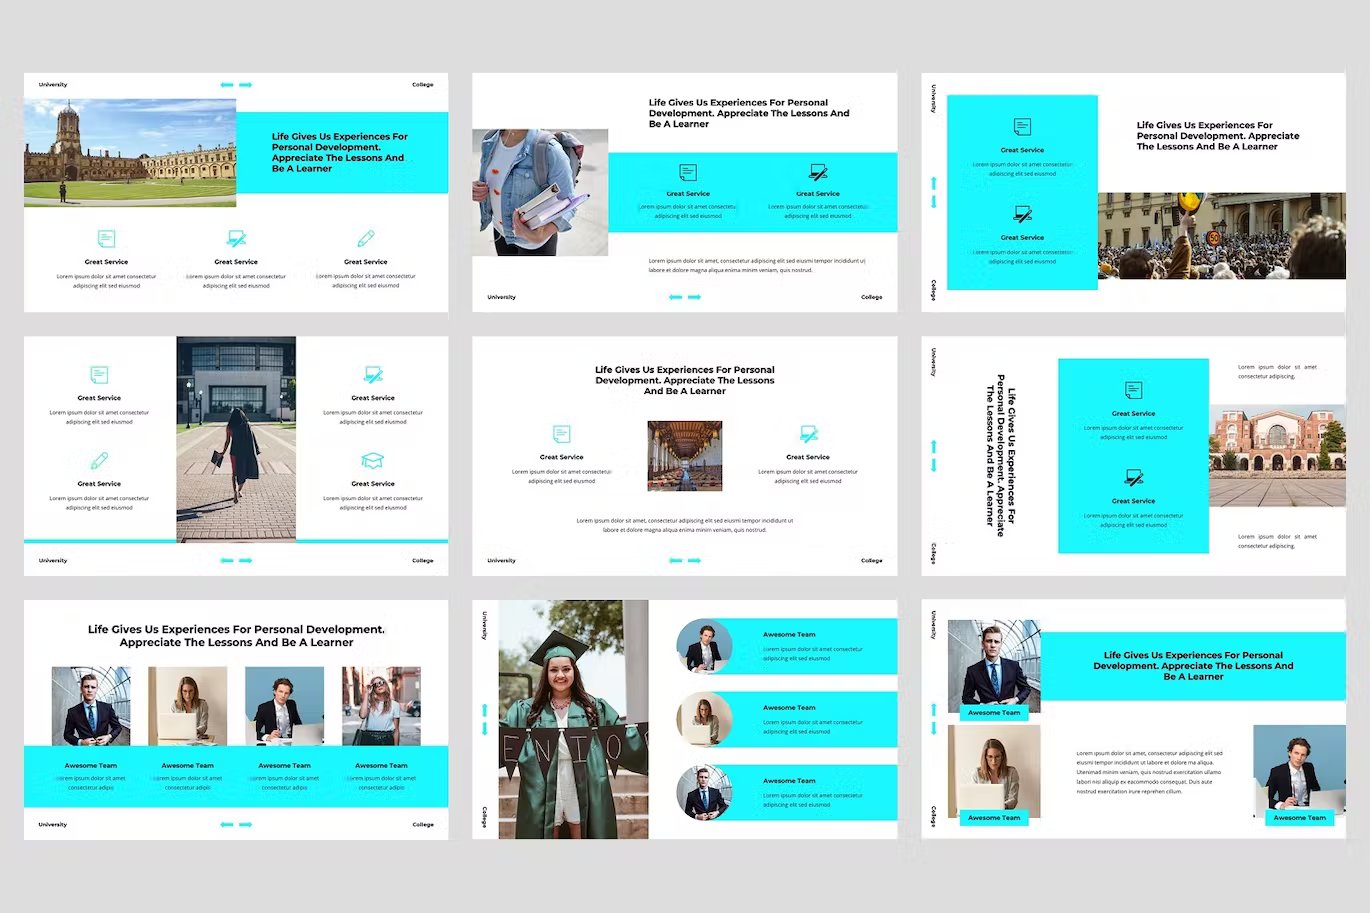 A set of 9 different sinar universiteit presentation templates in light blue, white, gray and black on a gray background.